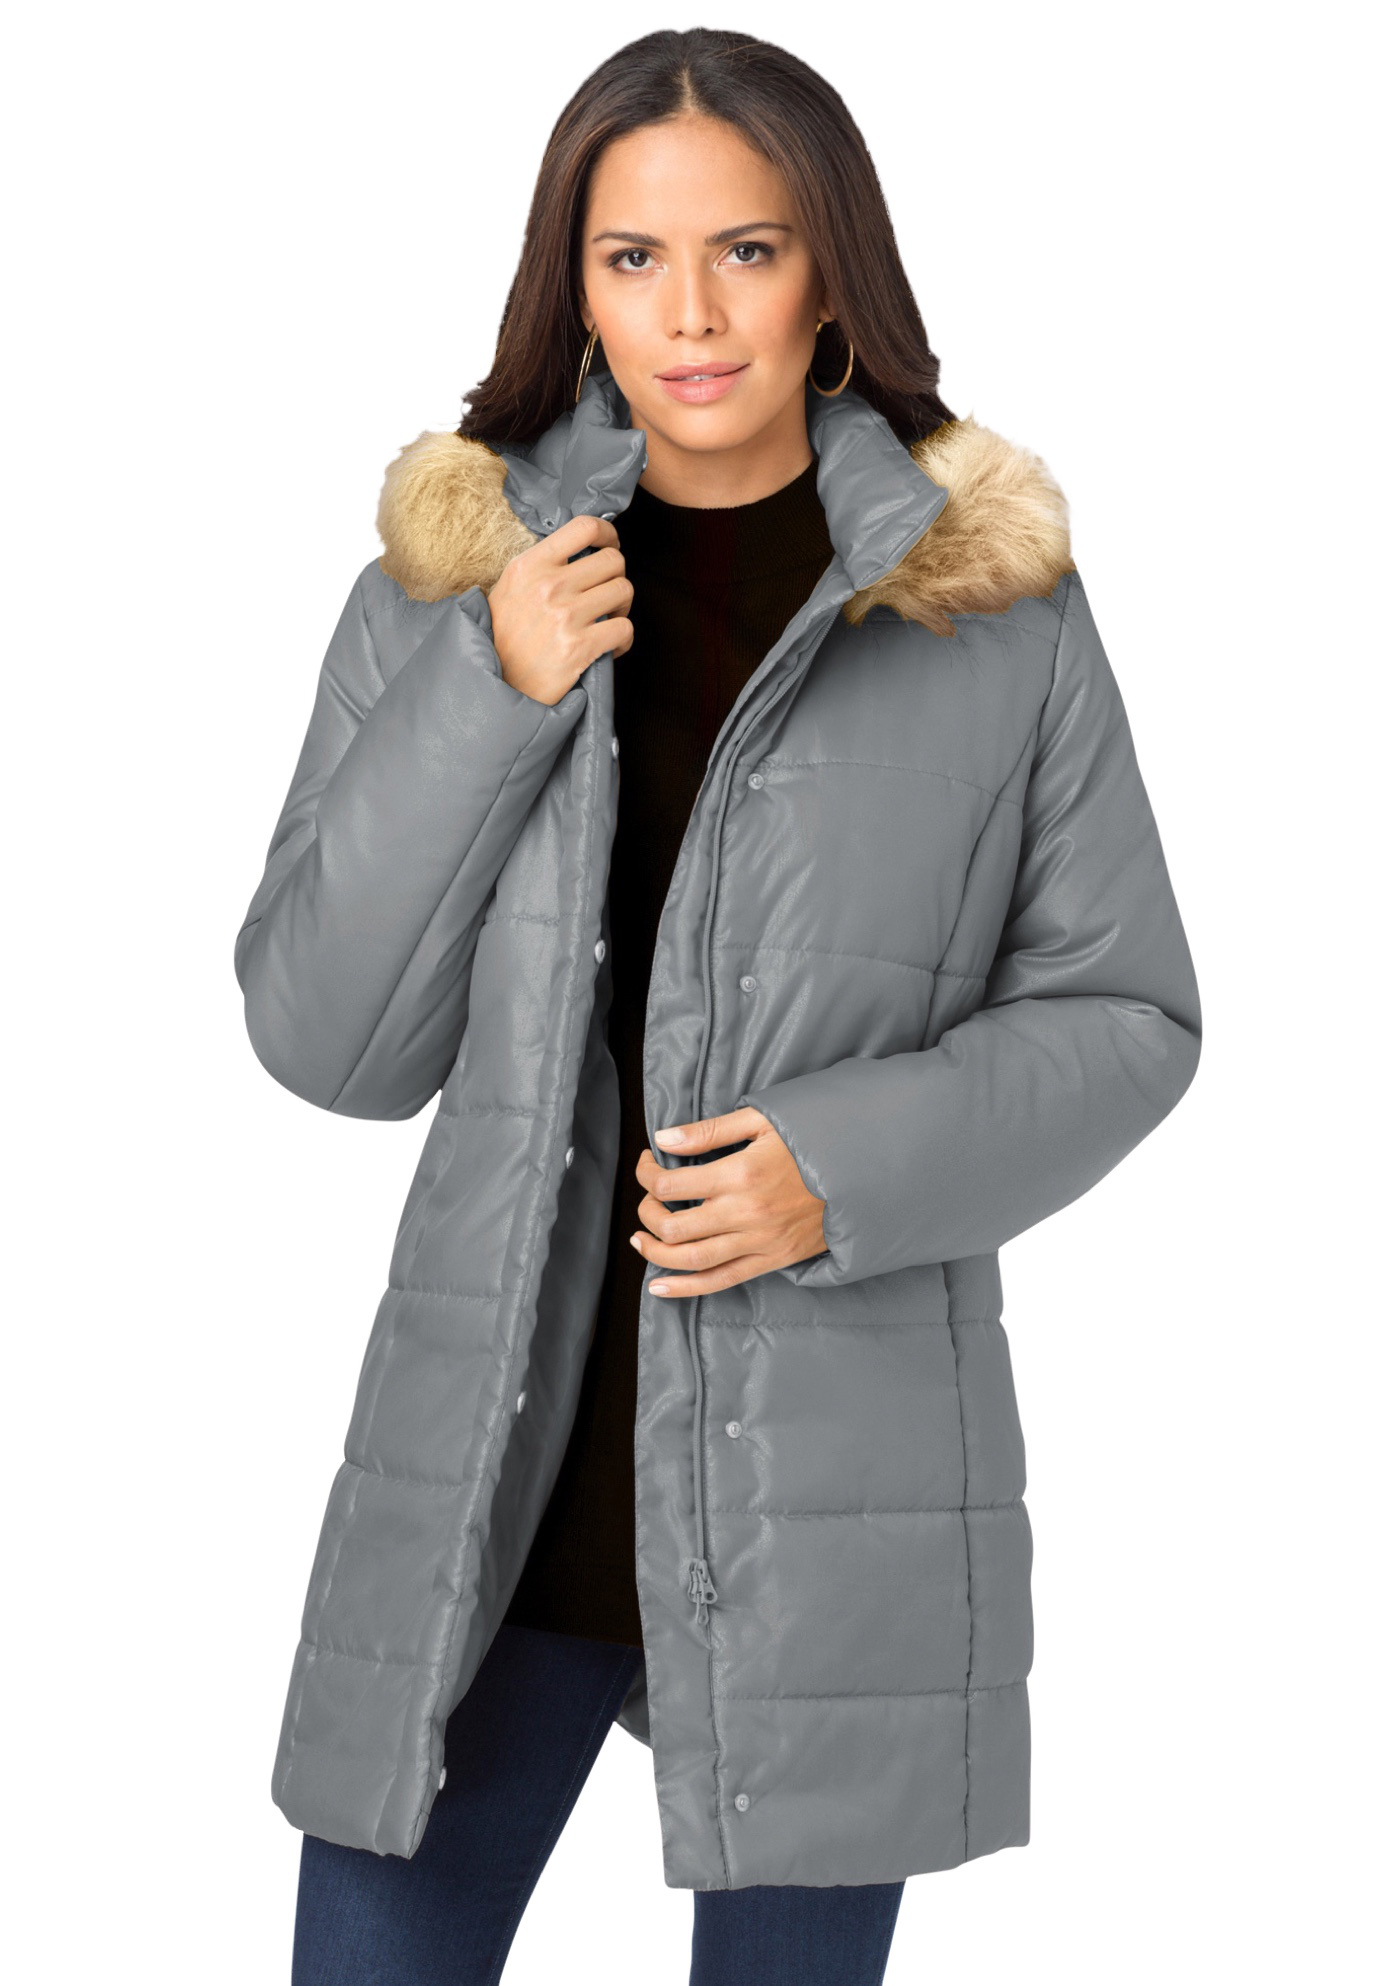 Roaman's Women's Plus Size Classic-Length Quilted Puffer Jacket Winter Coat - image 1 of 6